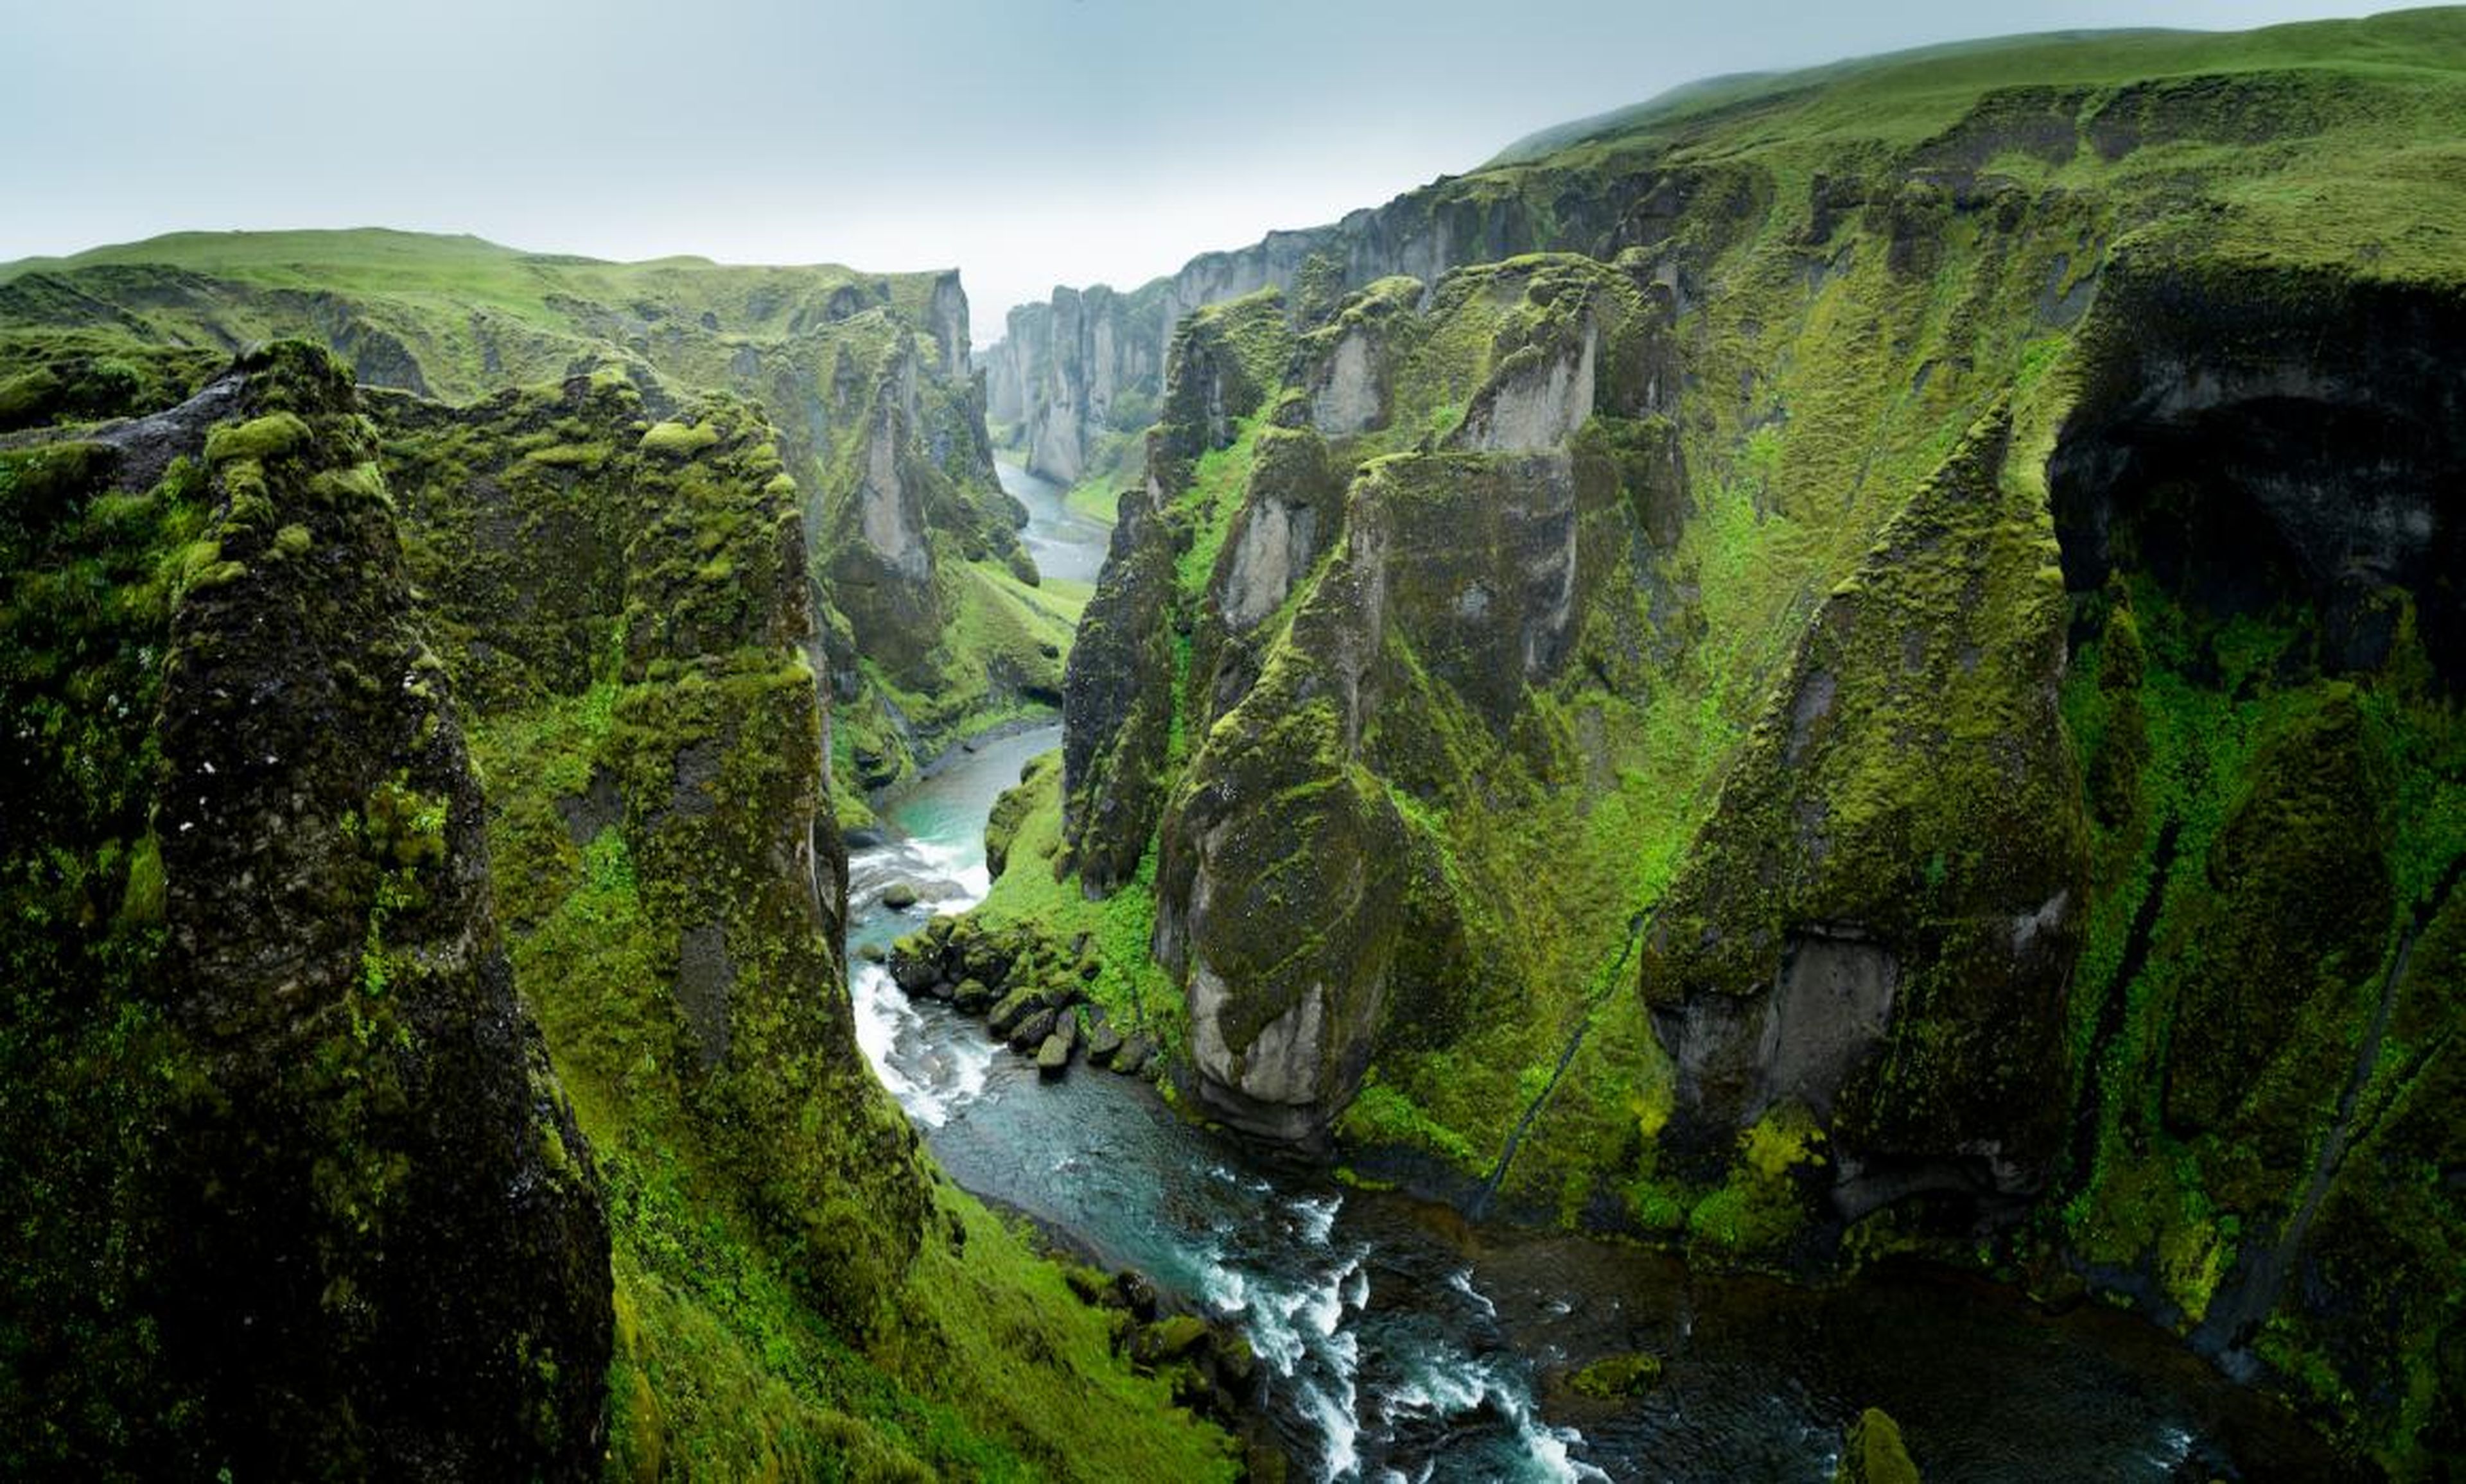 The Fjaðrárgljúfur canyon in Iceland attracted more people than the green cliffs could handle after a Justin Bieber music video.